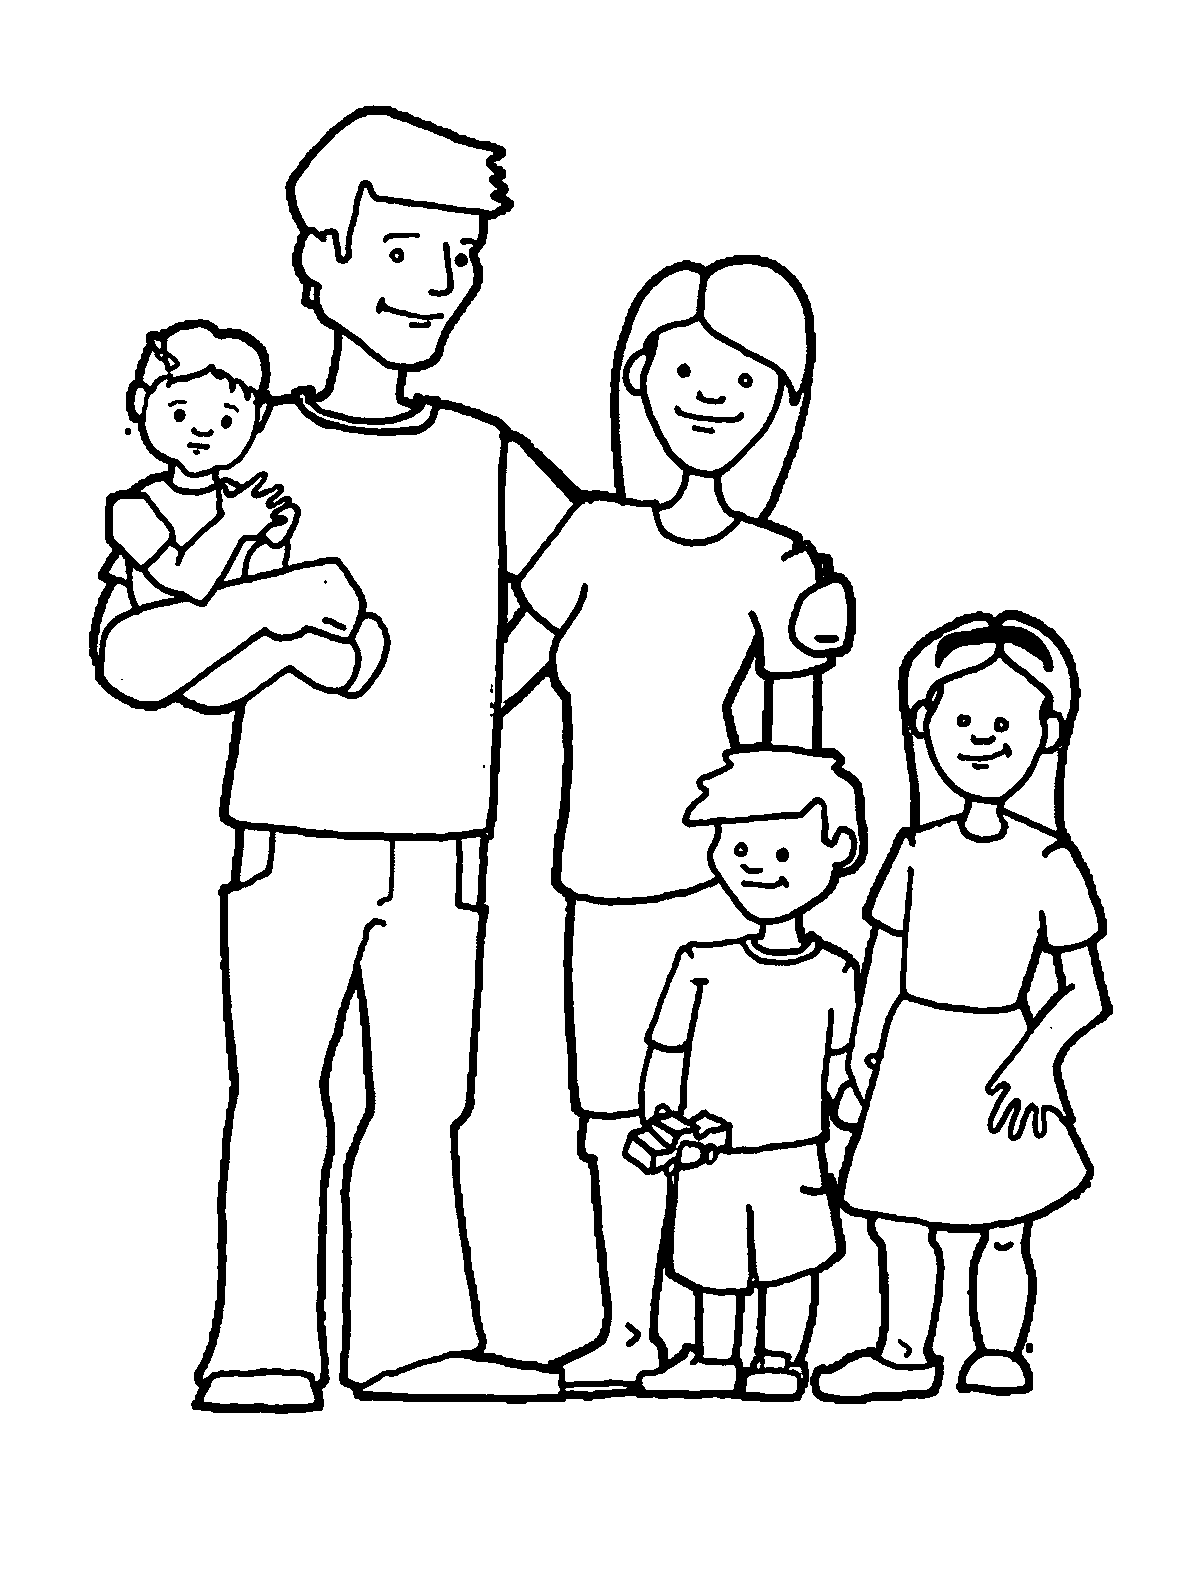 Happy Family Free Images Family Coloring Page | Wecoloringpage